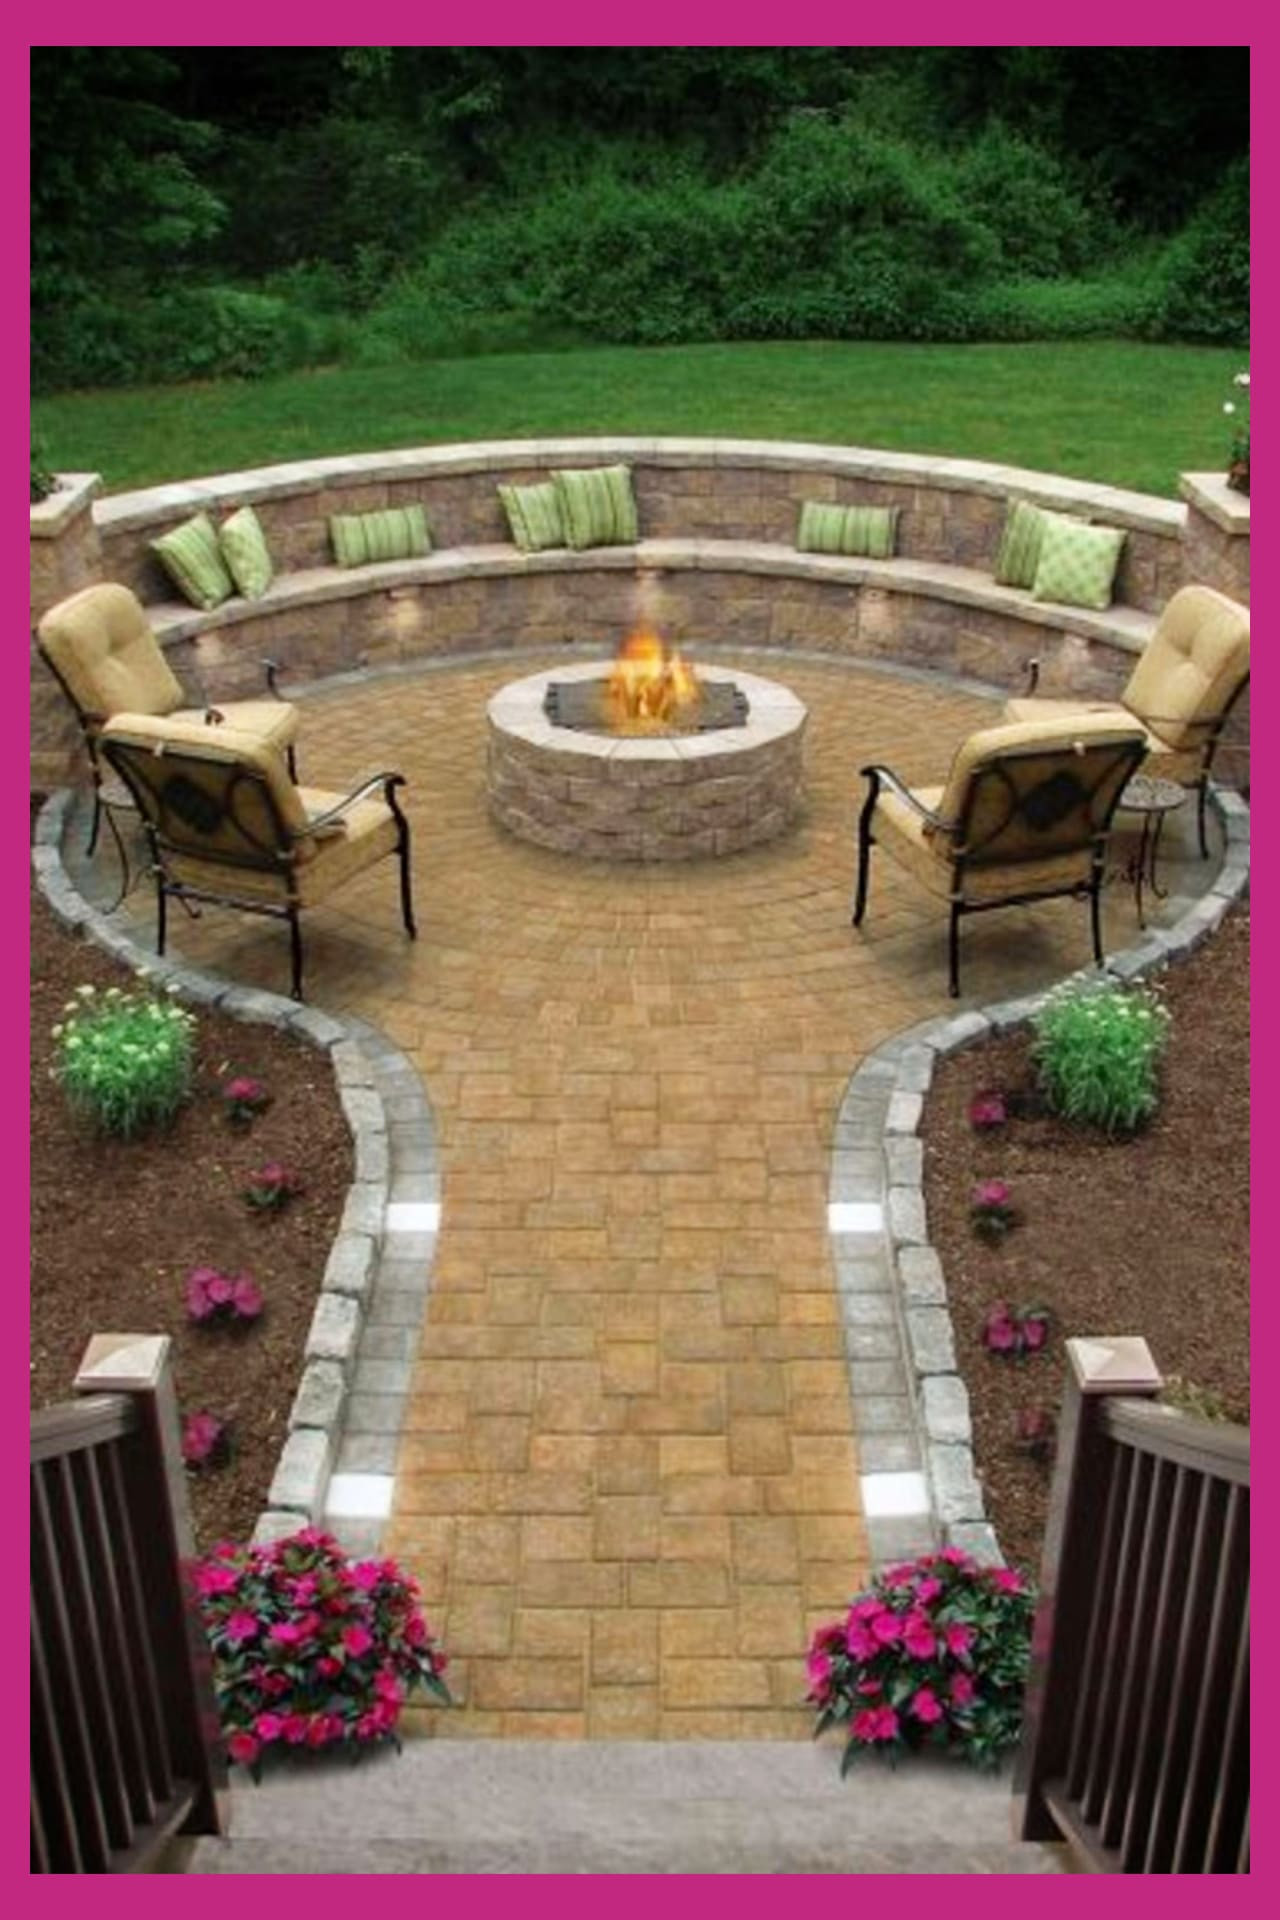 Firepit Patio Ideas
 Backyard Fire Pit Ideas and Designs for Your Yard Deck or